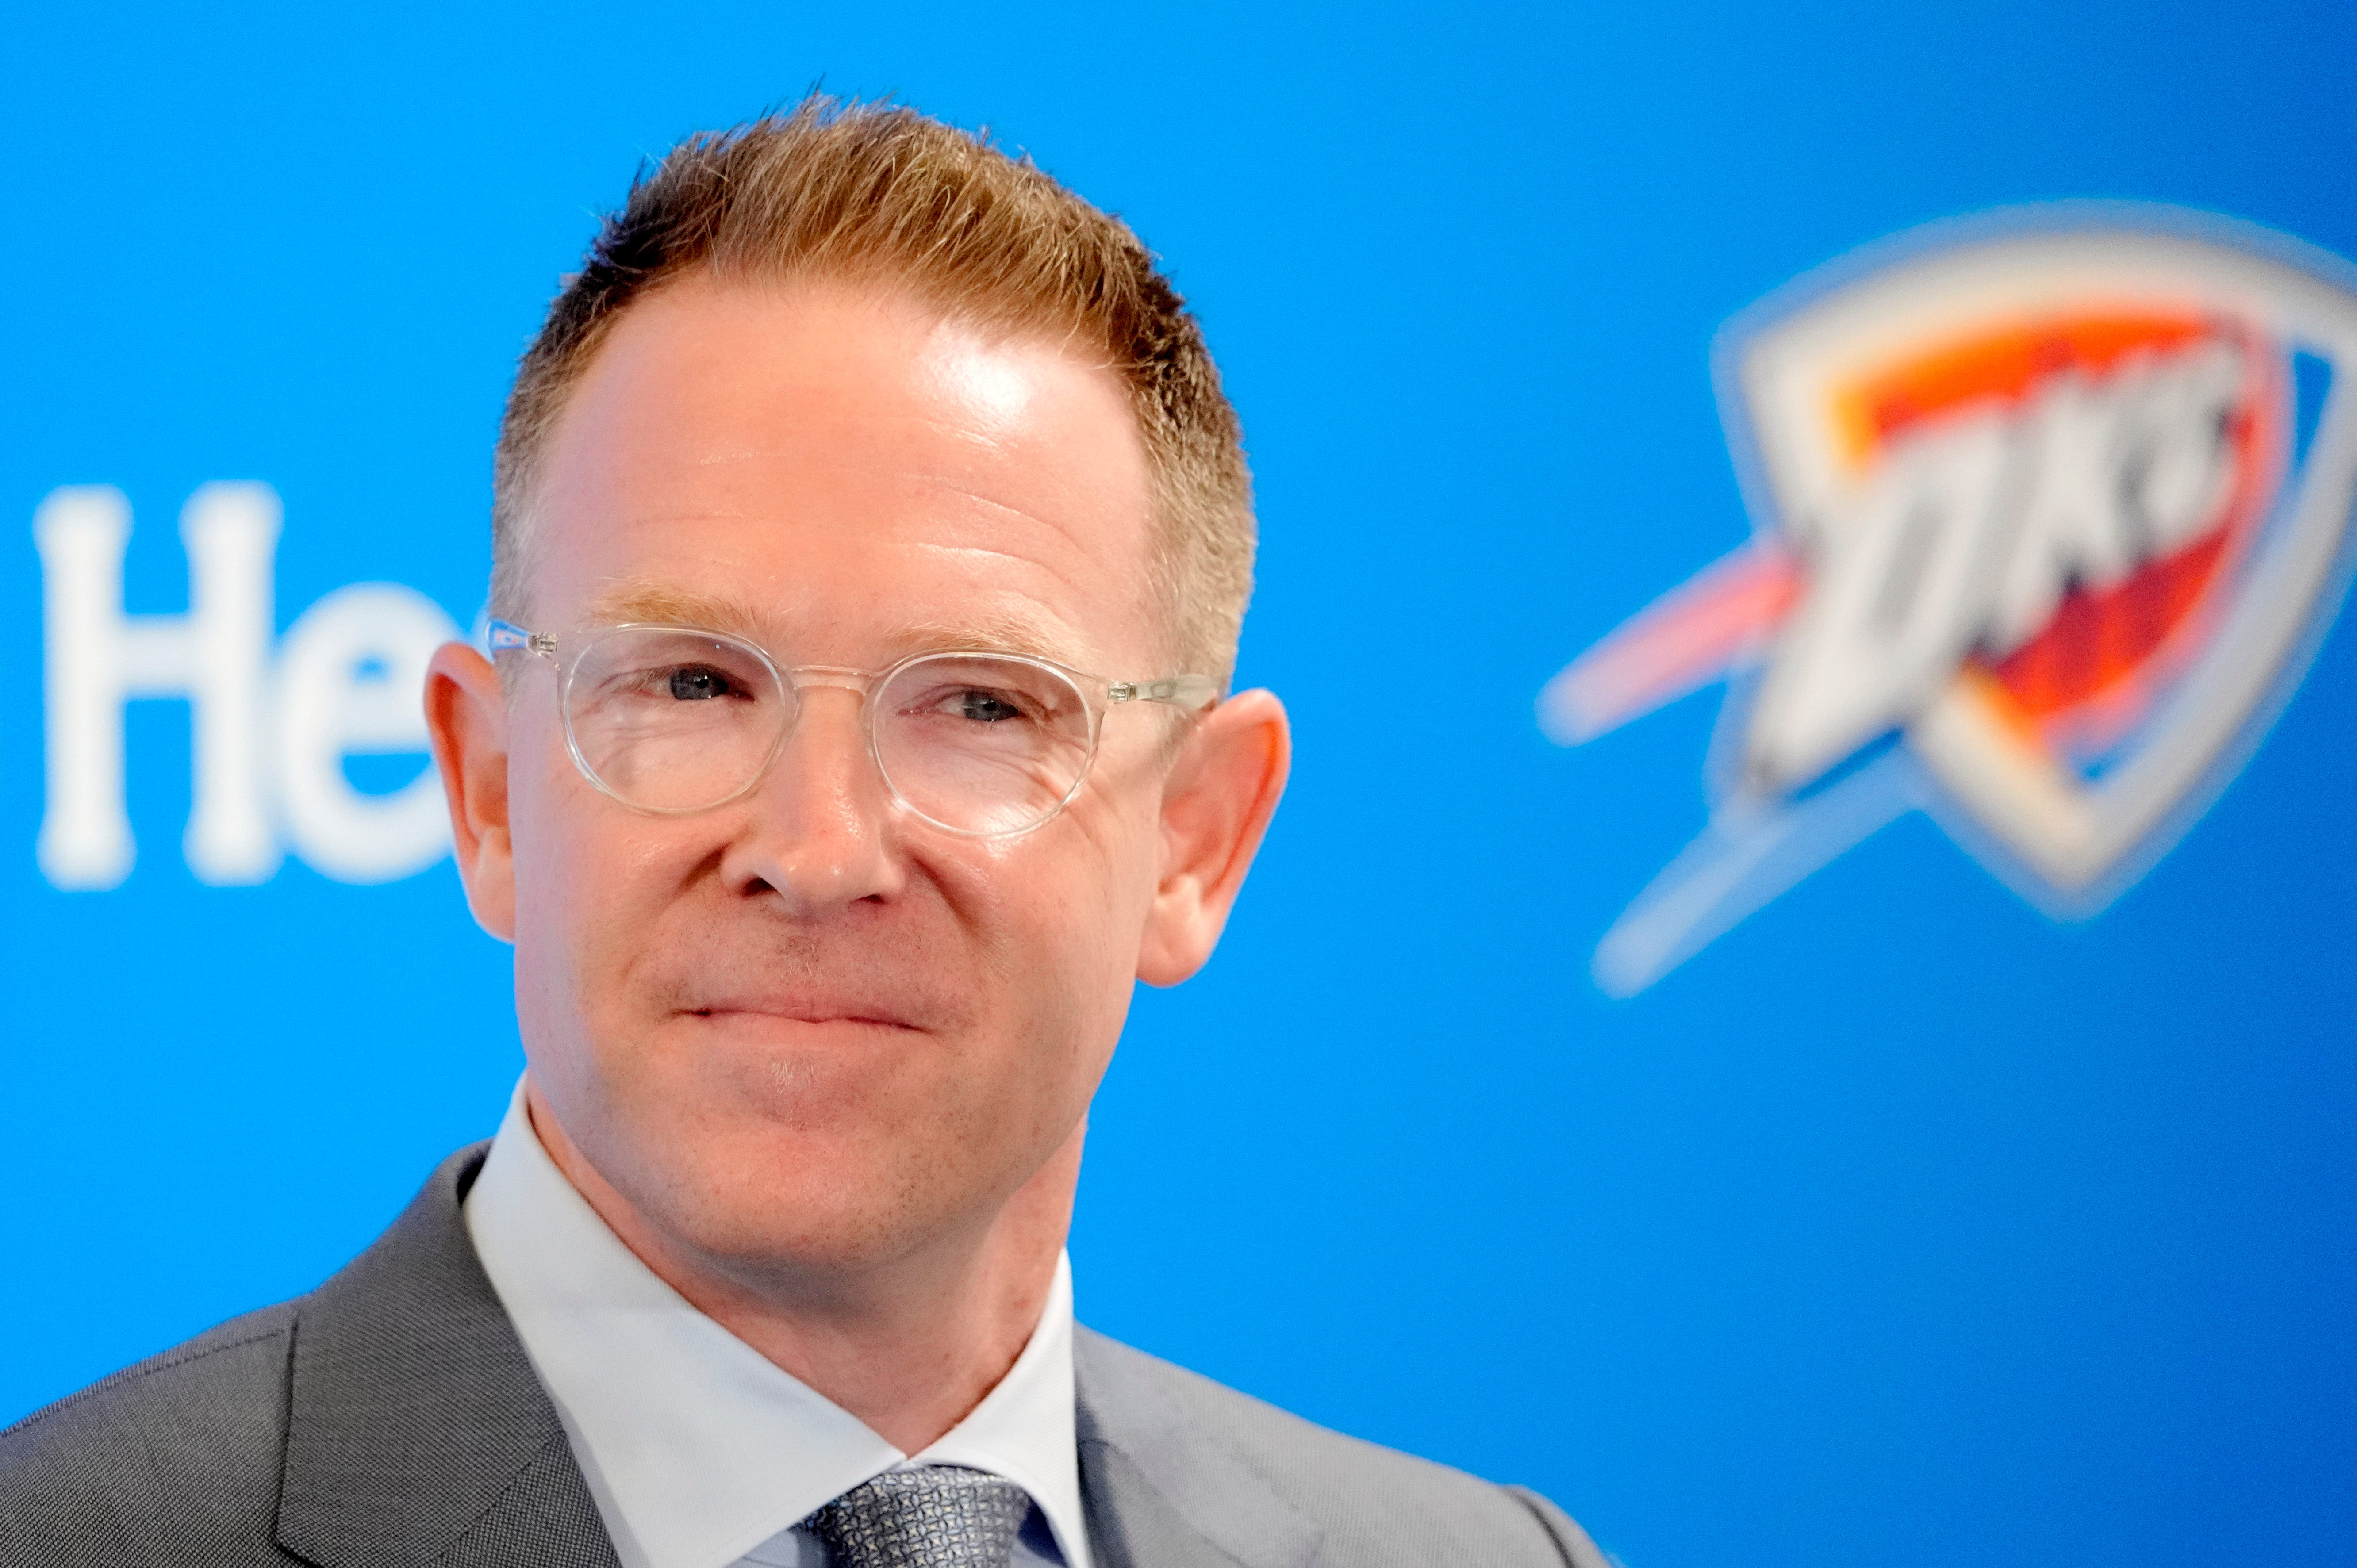 Looking back at OKC Thunder GM Sam Presti's op-ed five years later